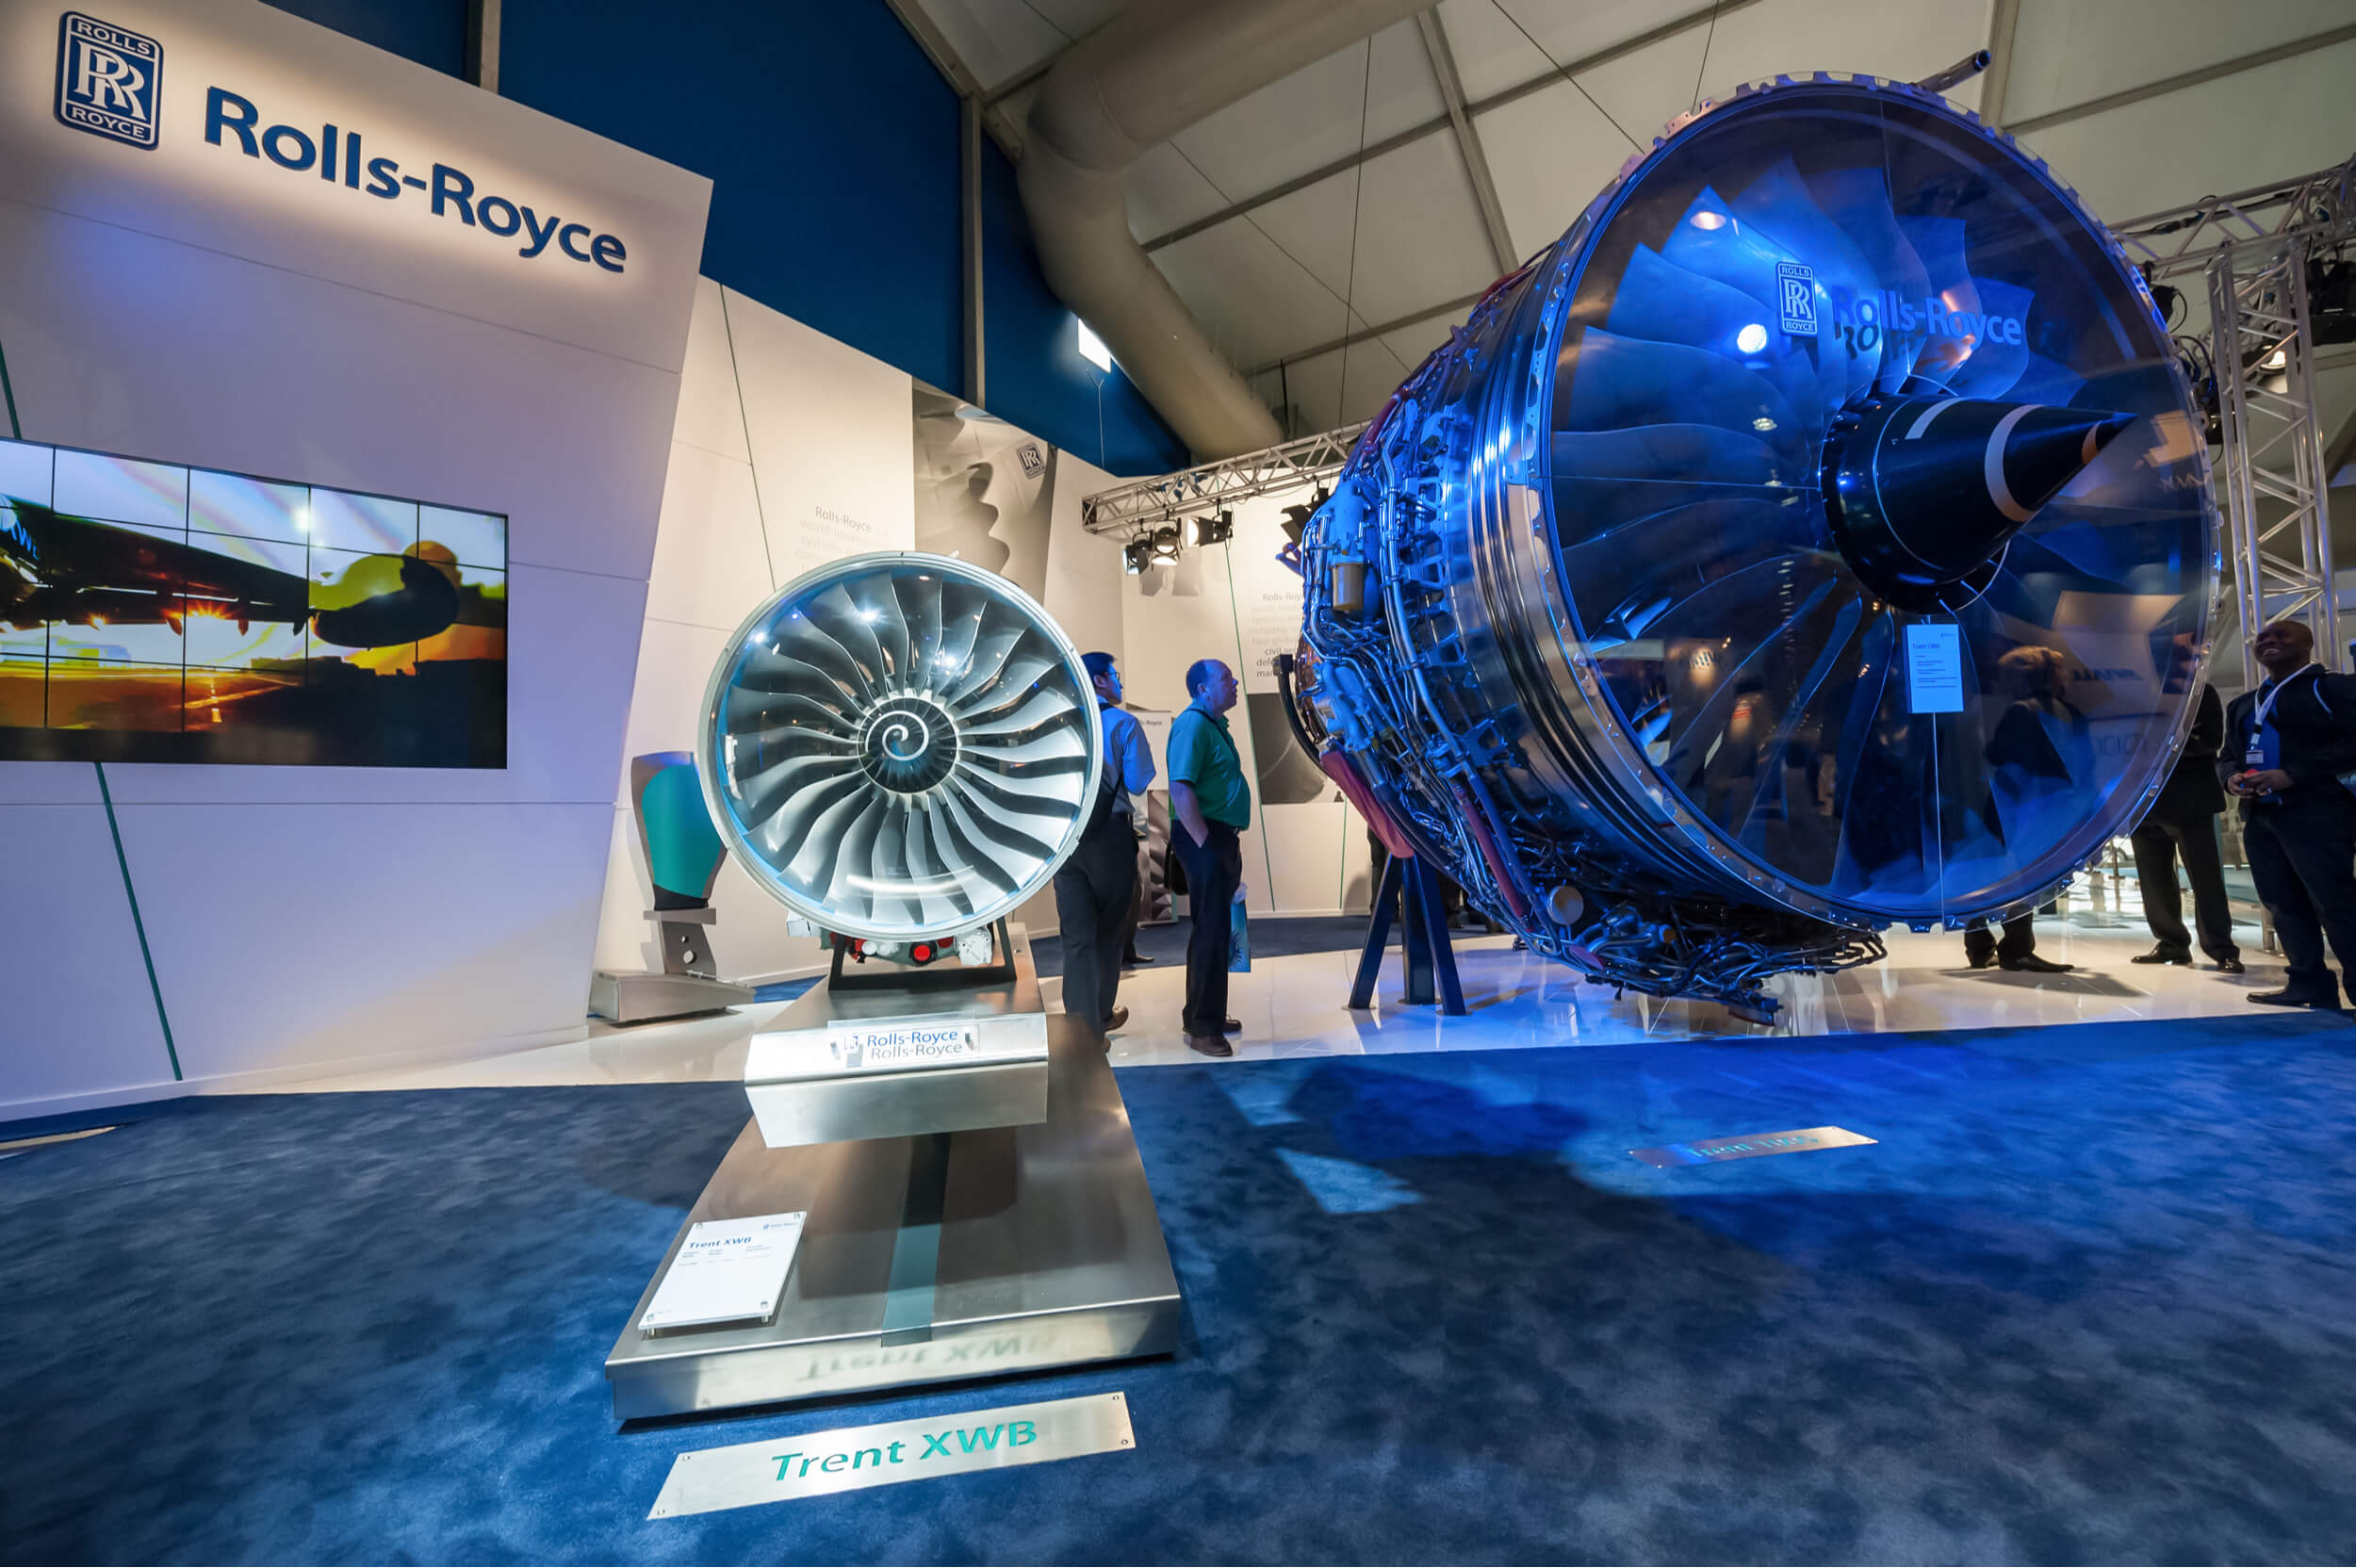 Exhibition by Rolls-Royce of the latest Trent 1000 jet engine at the Farnborough Airshow, UK on July 12, 2012